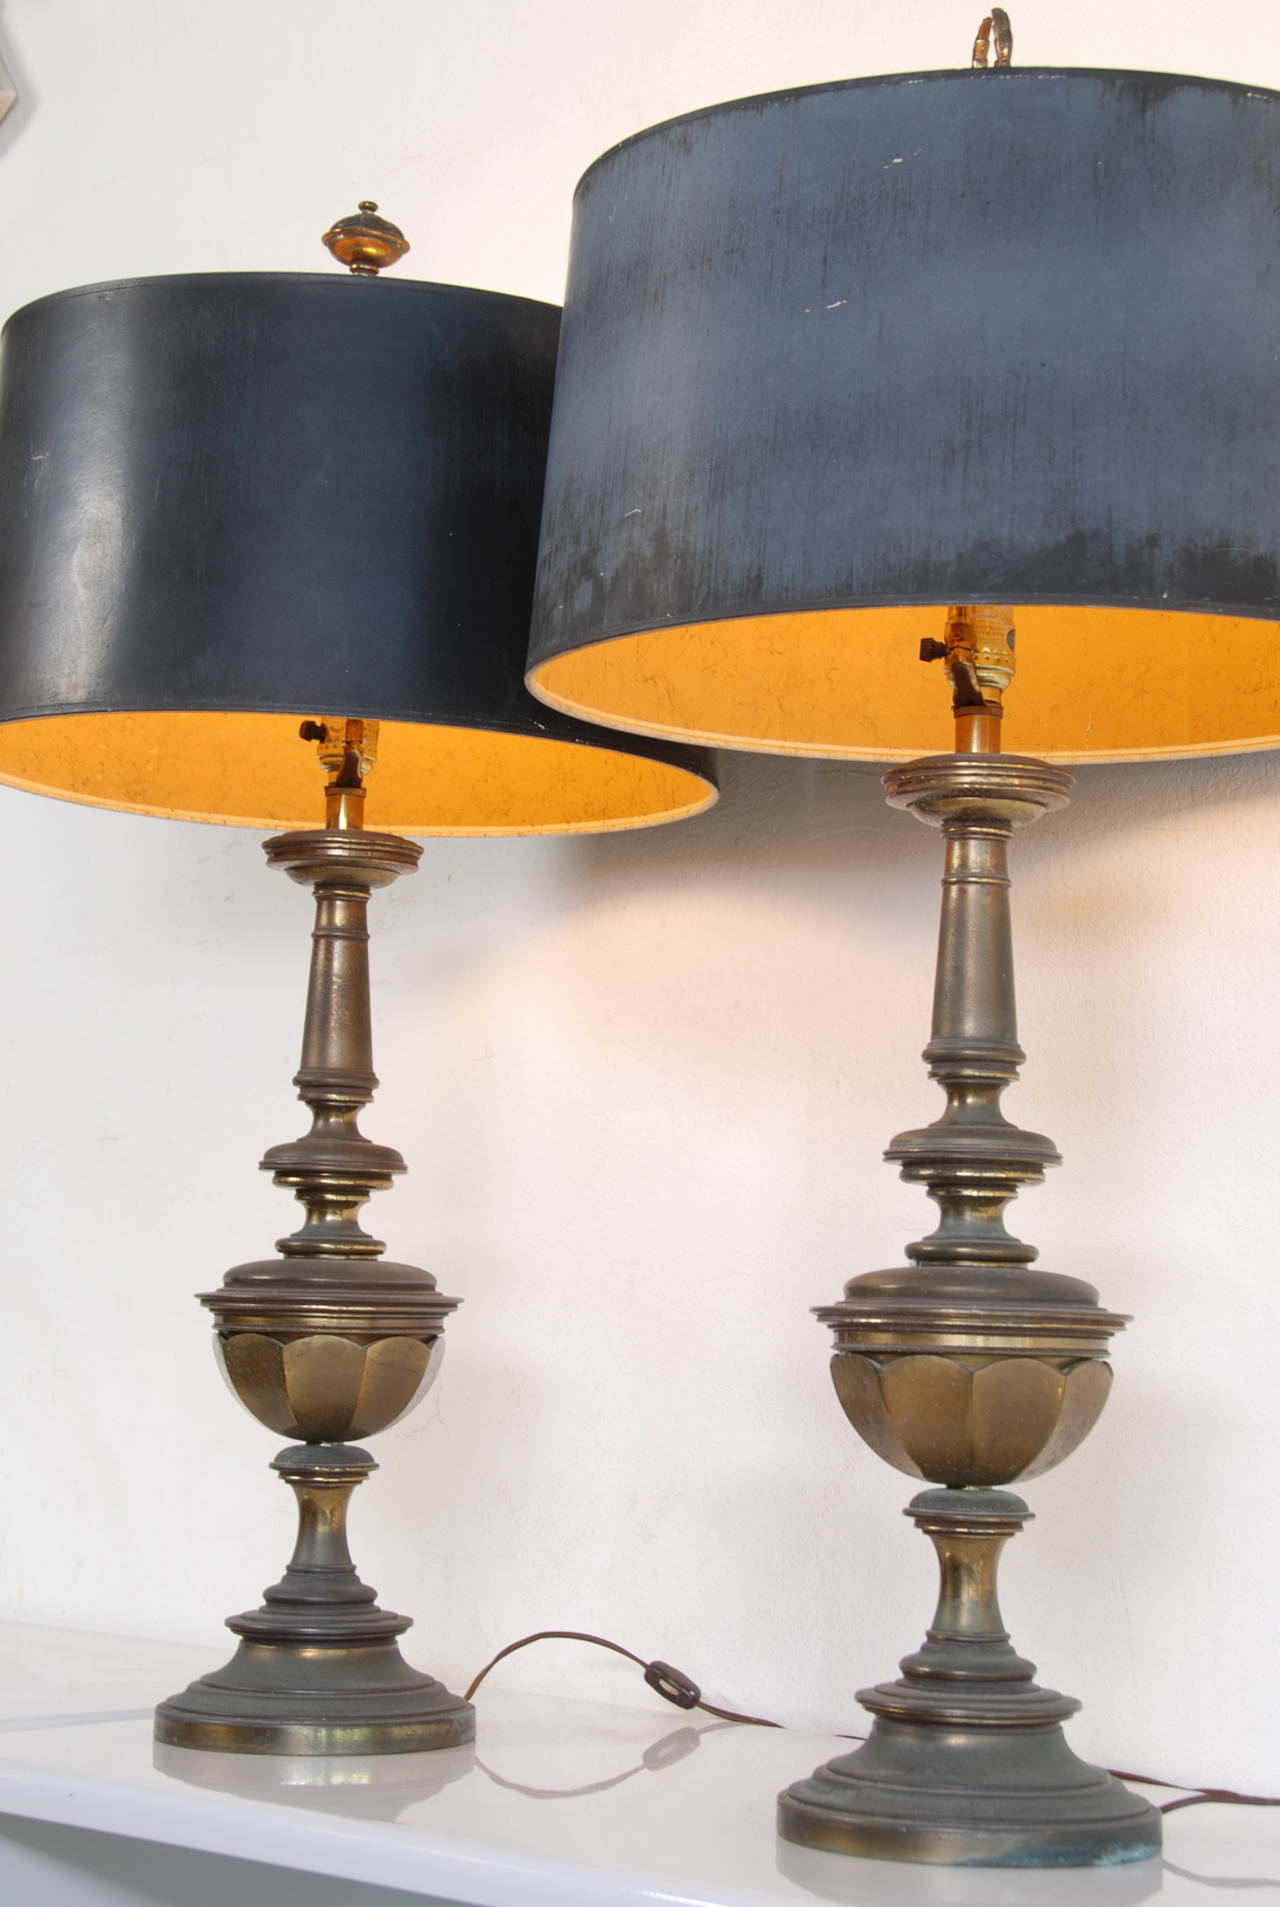 This is a great pair of mid century Stiffel Lamps with the original shades. Stiffel sticker on the lamps and stamped into shade armature. Price is for the pair.
35